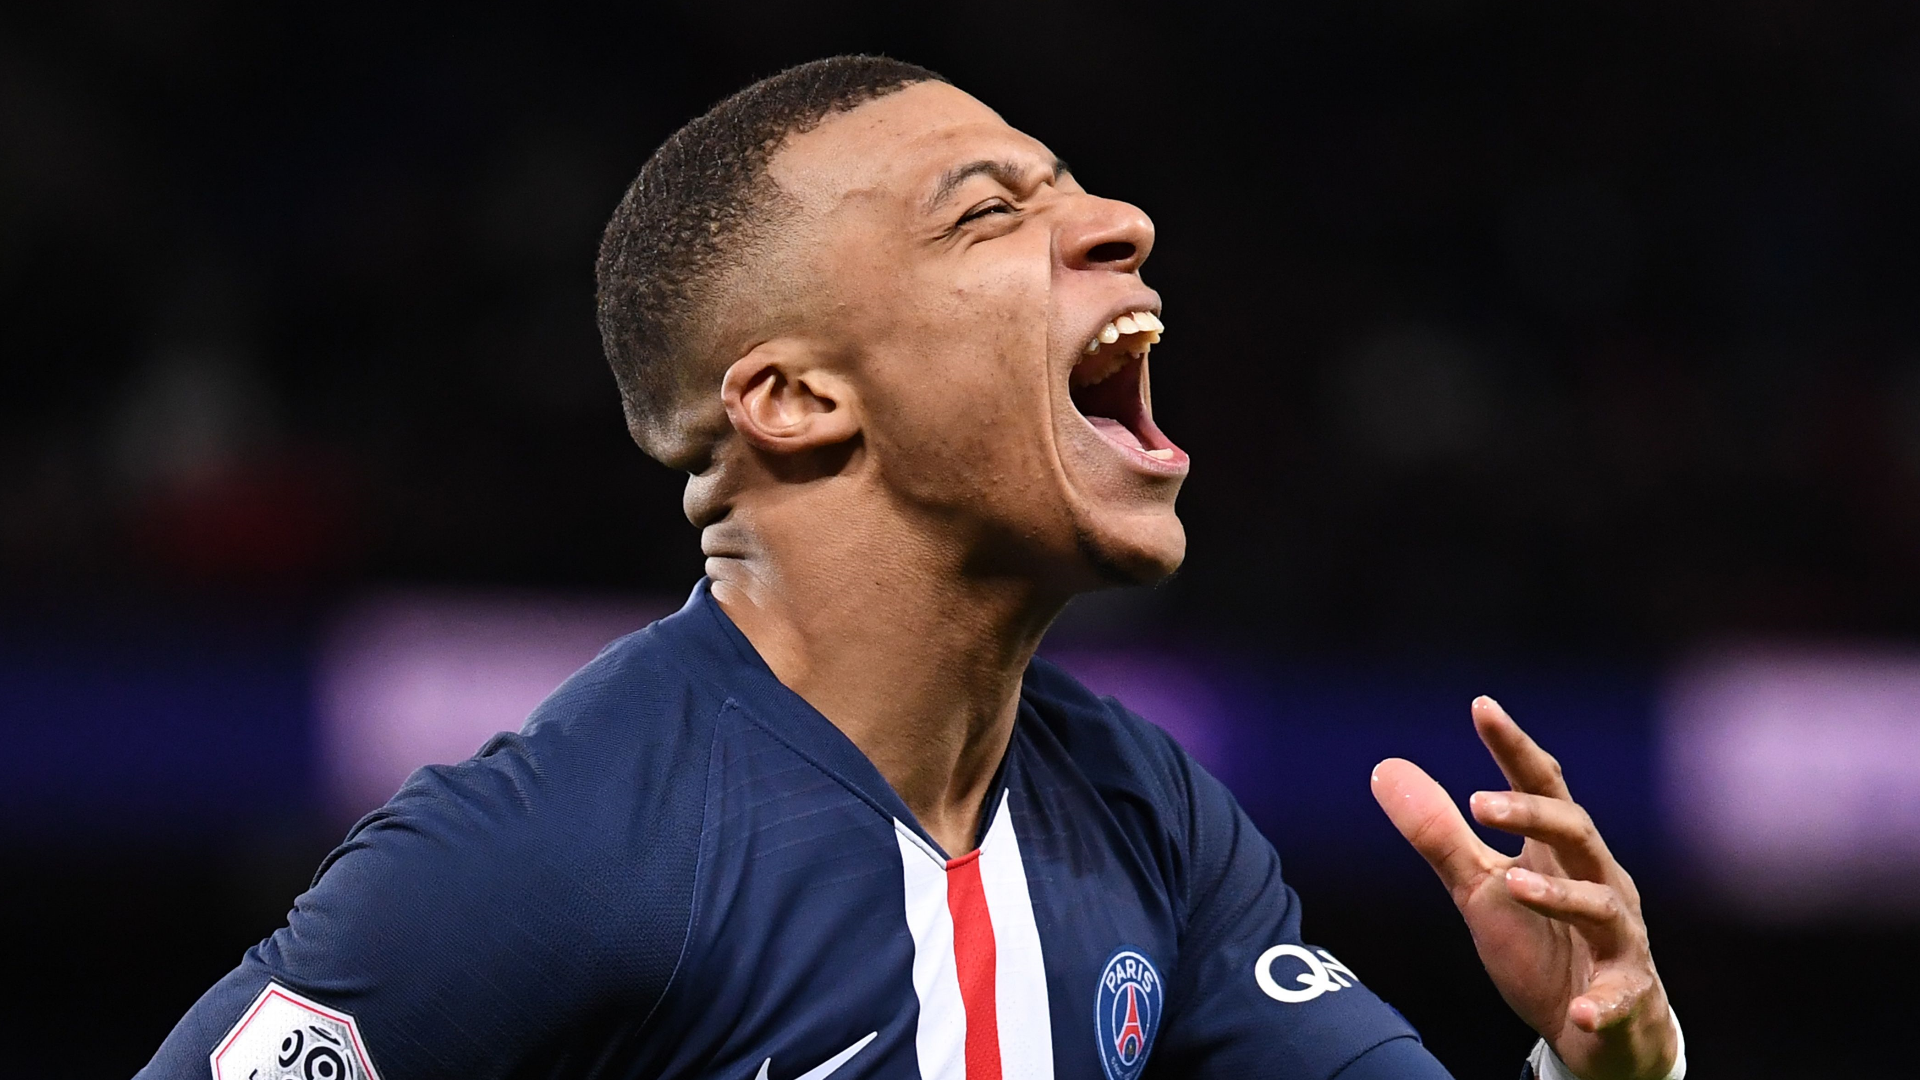 Project Mbappe Meaning Of The Psg Star Meme Explained Best Social Posts Goal Com Us